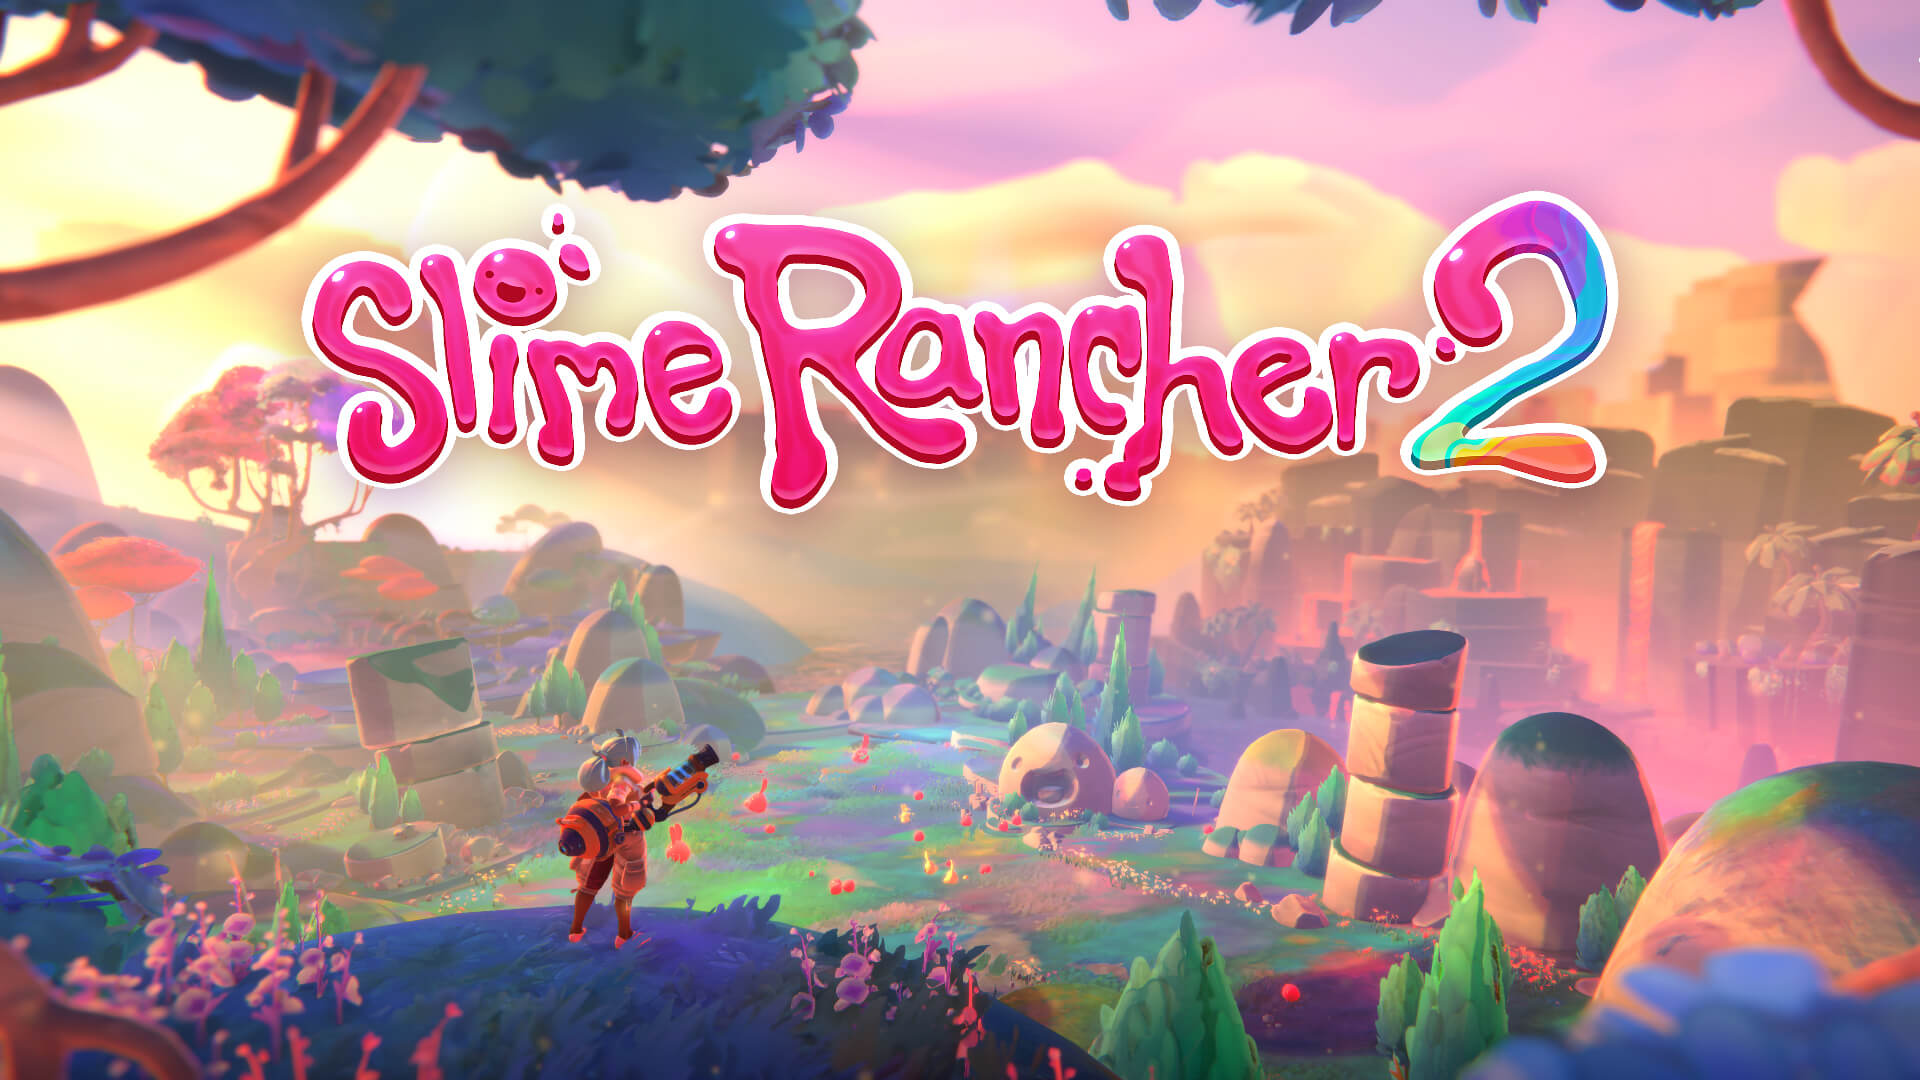 Will Slime Rancher 2 be on Xbox One? – Answered